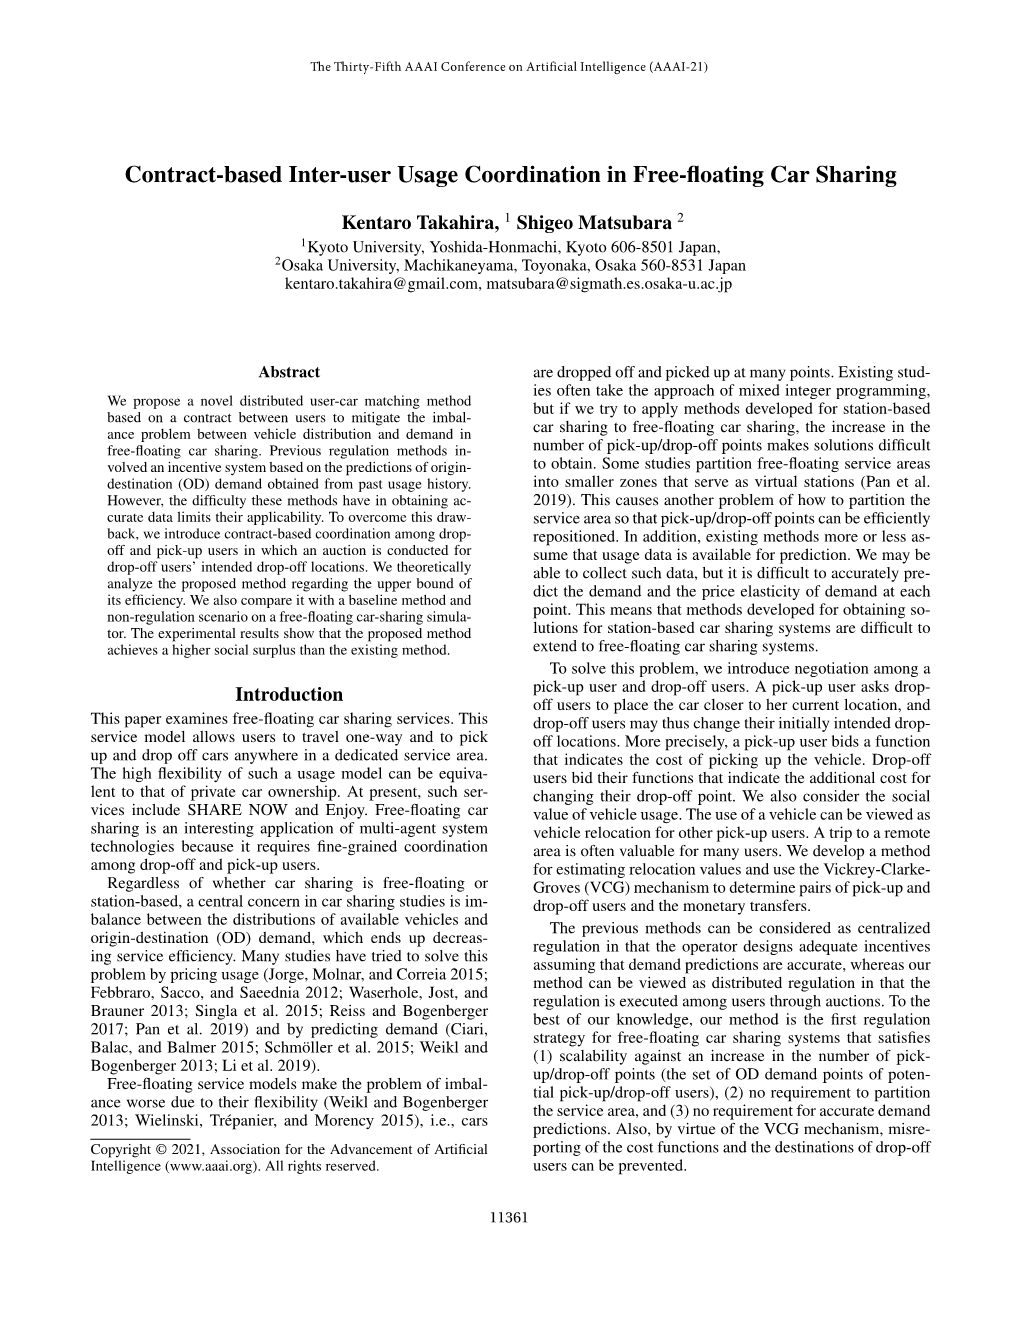 Contract-Based Inter-User Usage Coordination in Free-Floating Car